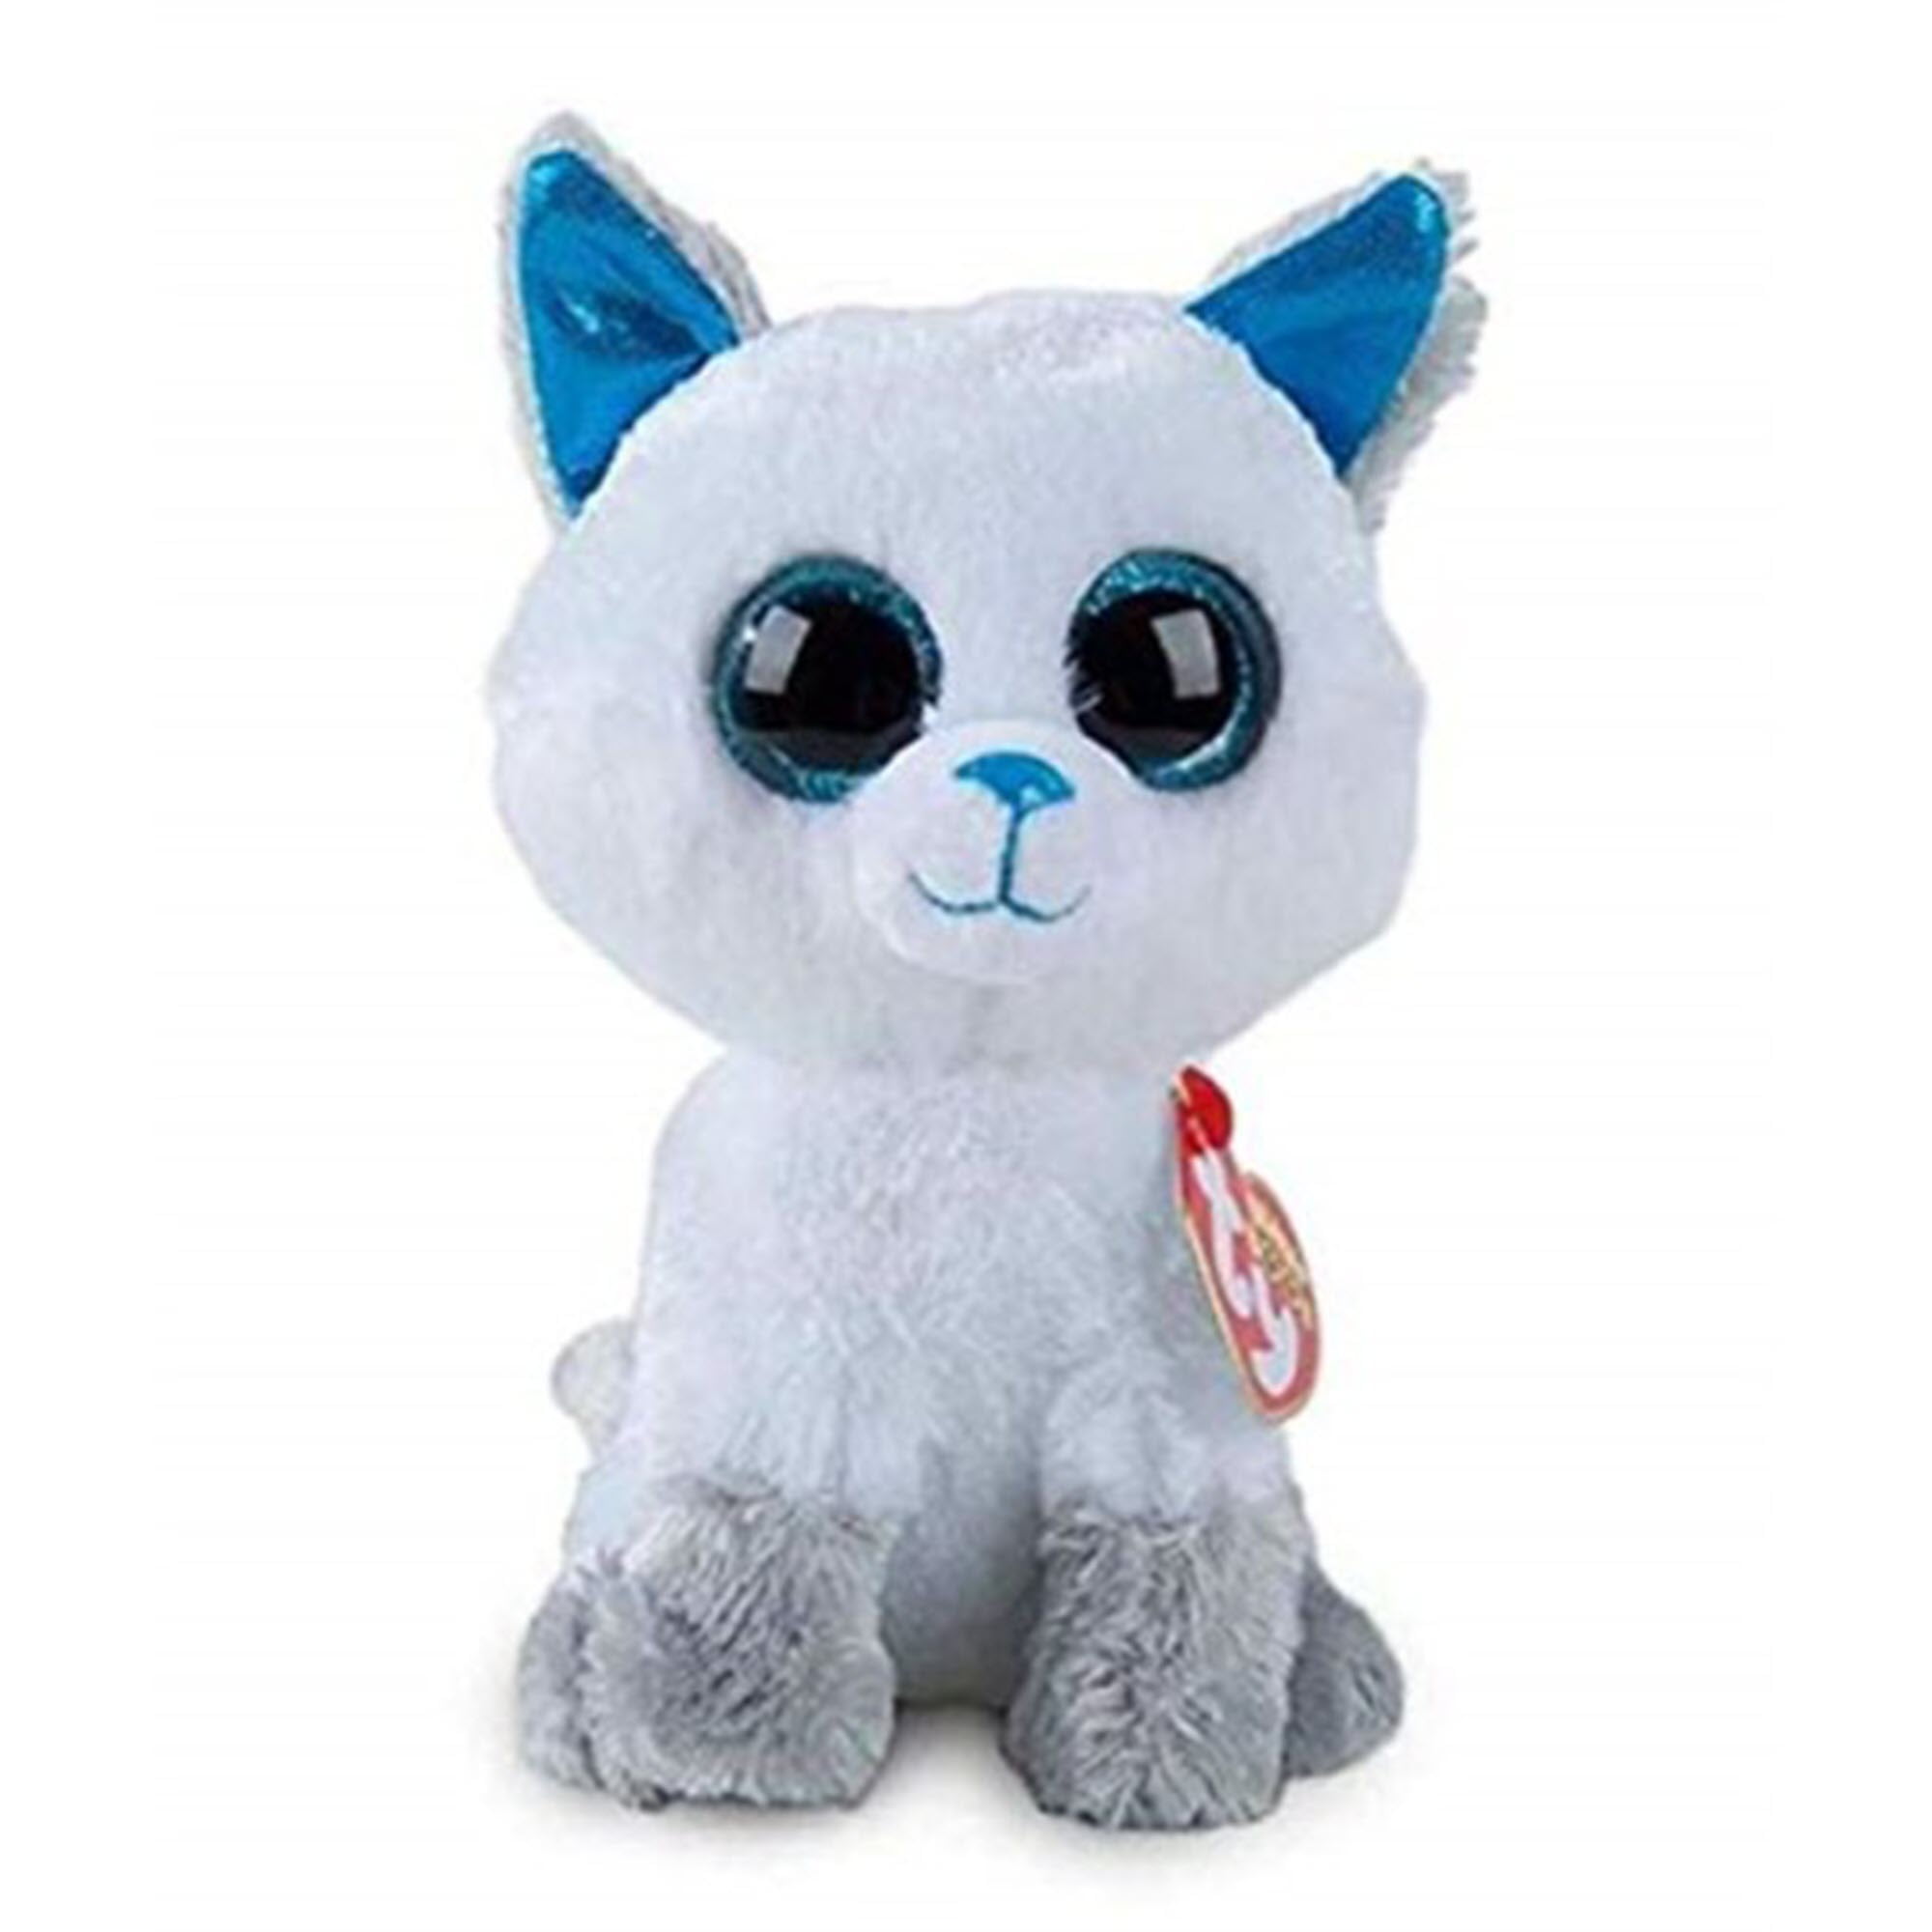 Ty Beanie Boos Frost Christmas Polar Bear 6" Claire's MWMT Exact 1 for sale online 